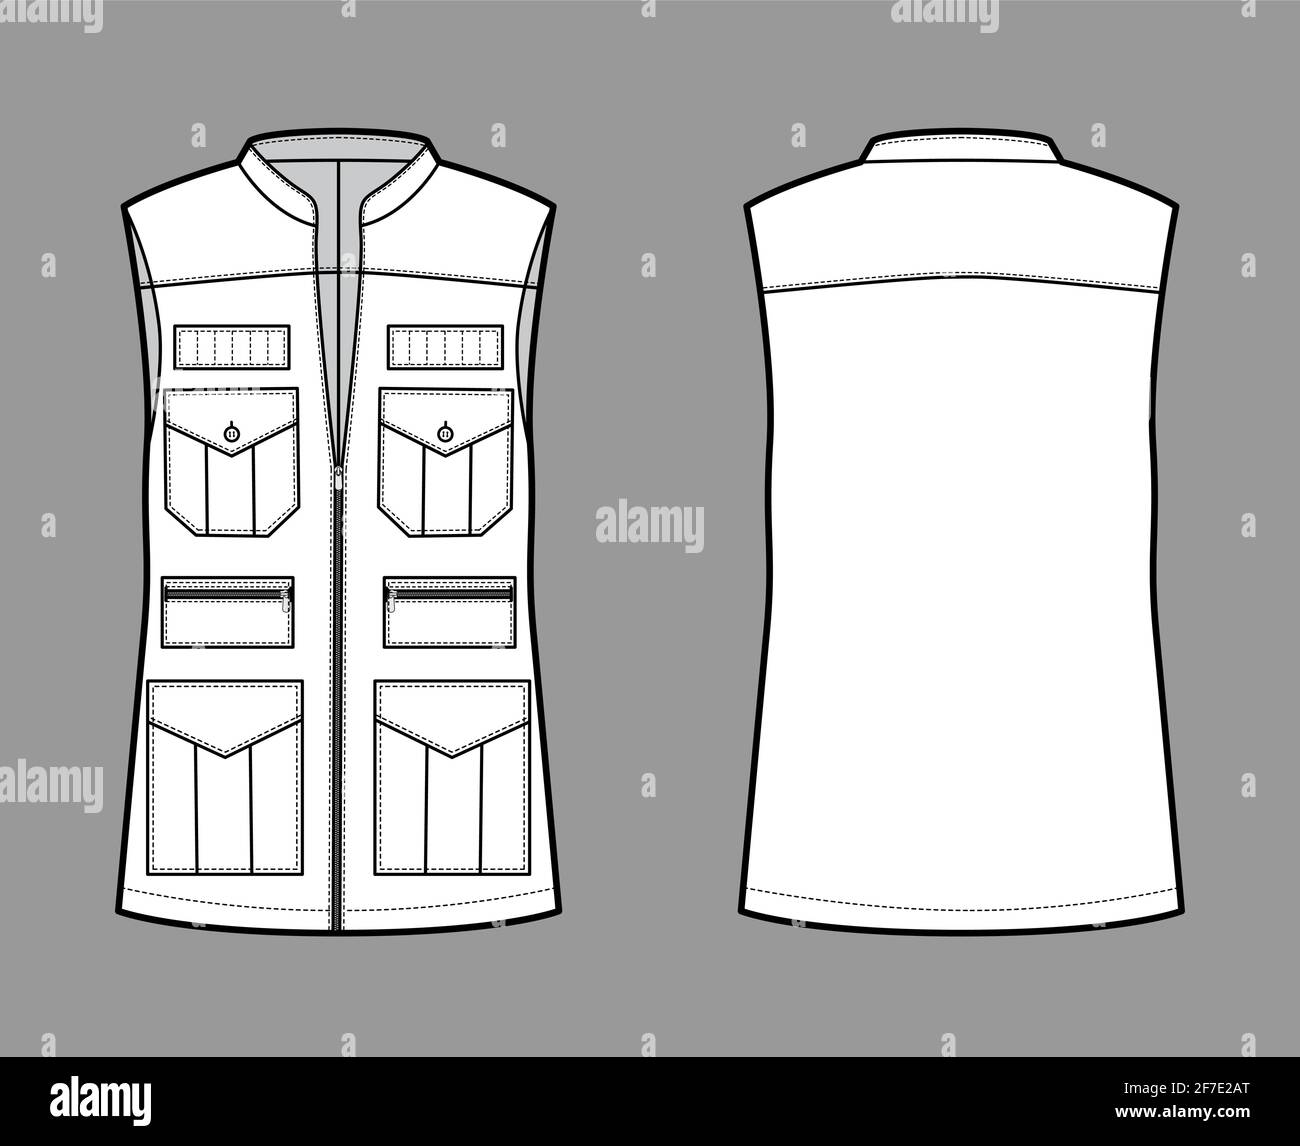 Safari vest waistcoat technical fashion illustration with sleeveless, stand collar, zip-up closure, pockets, oversized body. Flat template front, back, white color style. Women, men, unisex CAD mockup Stock Vector